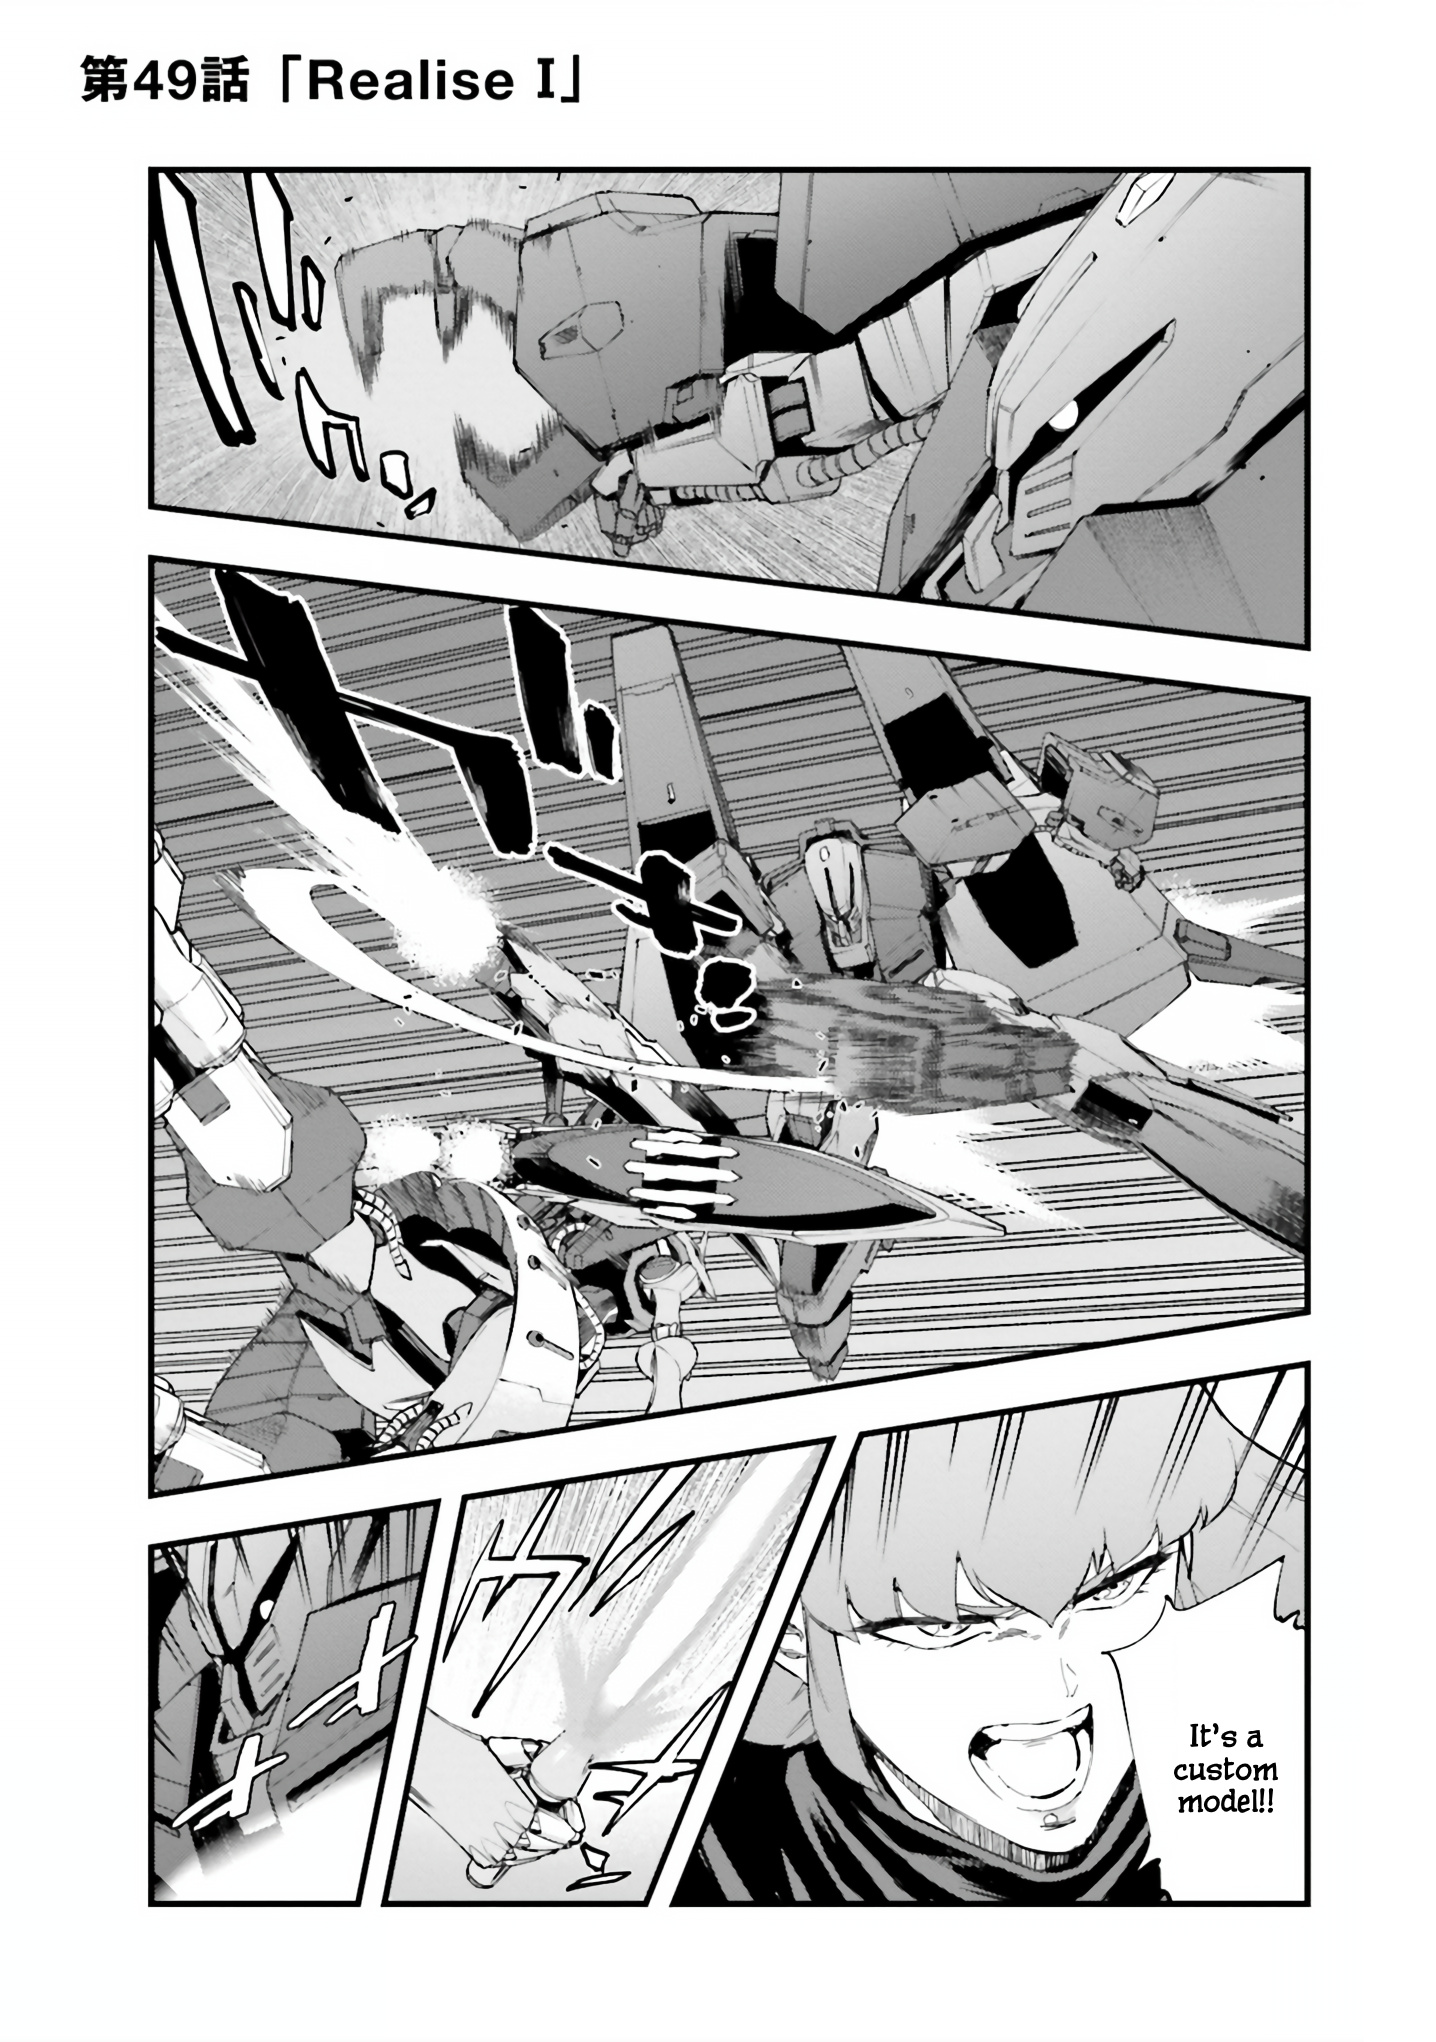 Mobile Suit Gundam Walpurgis Vol.9 Chapter 49: Realise I - Picture 1